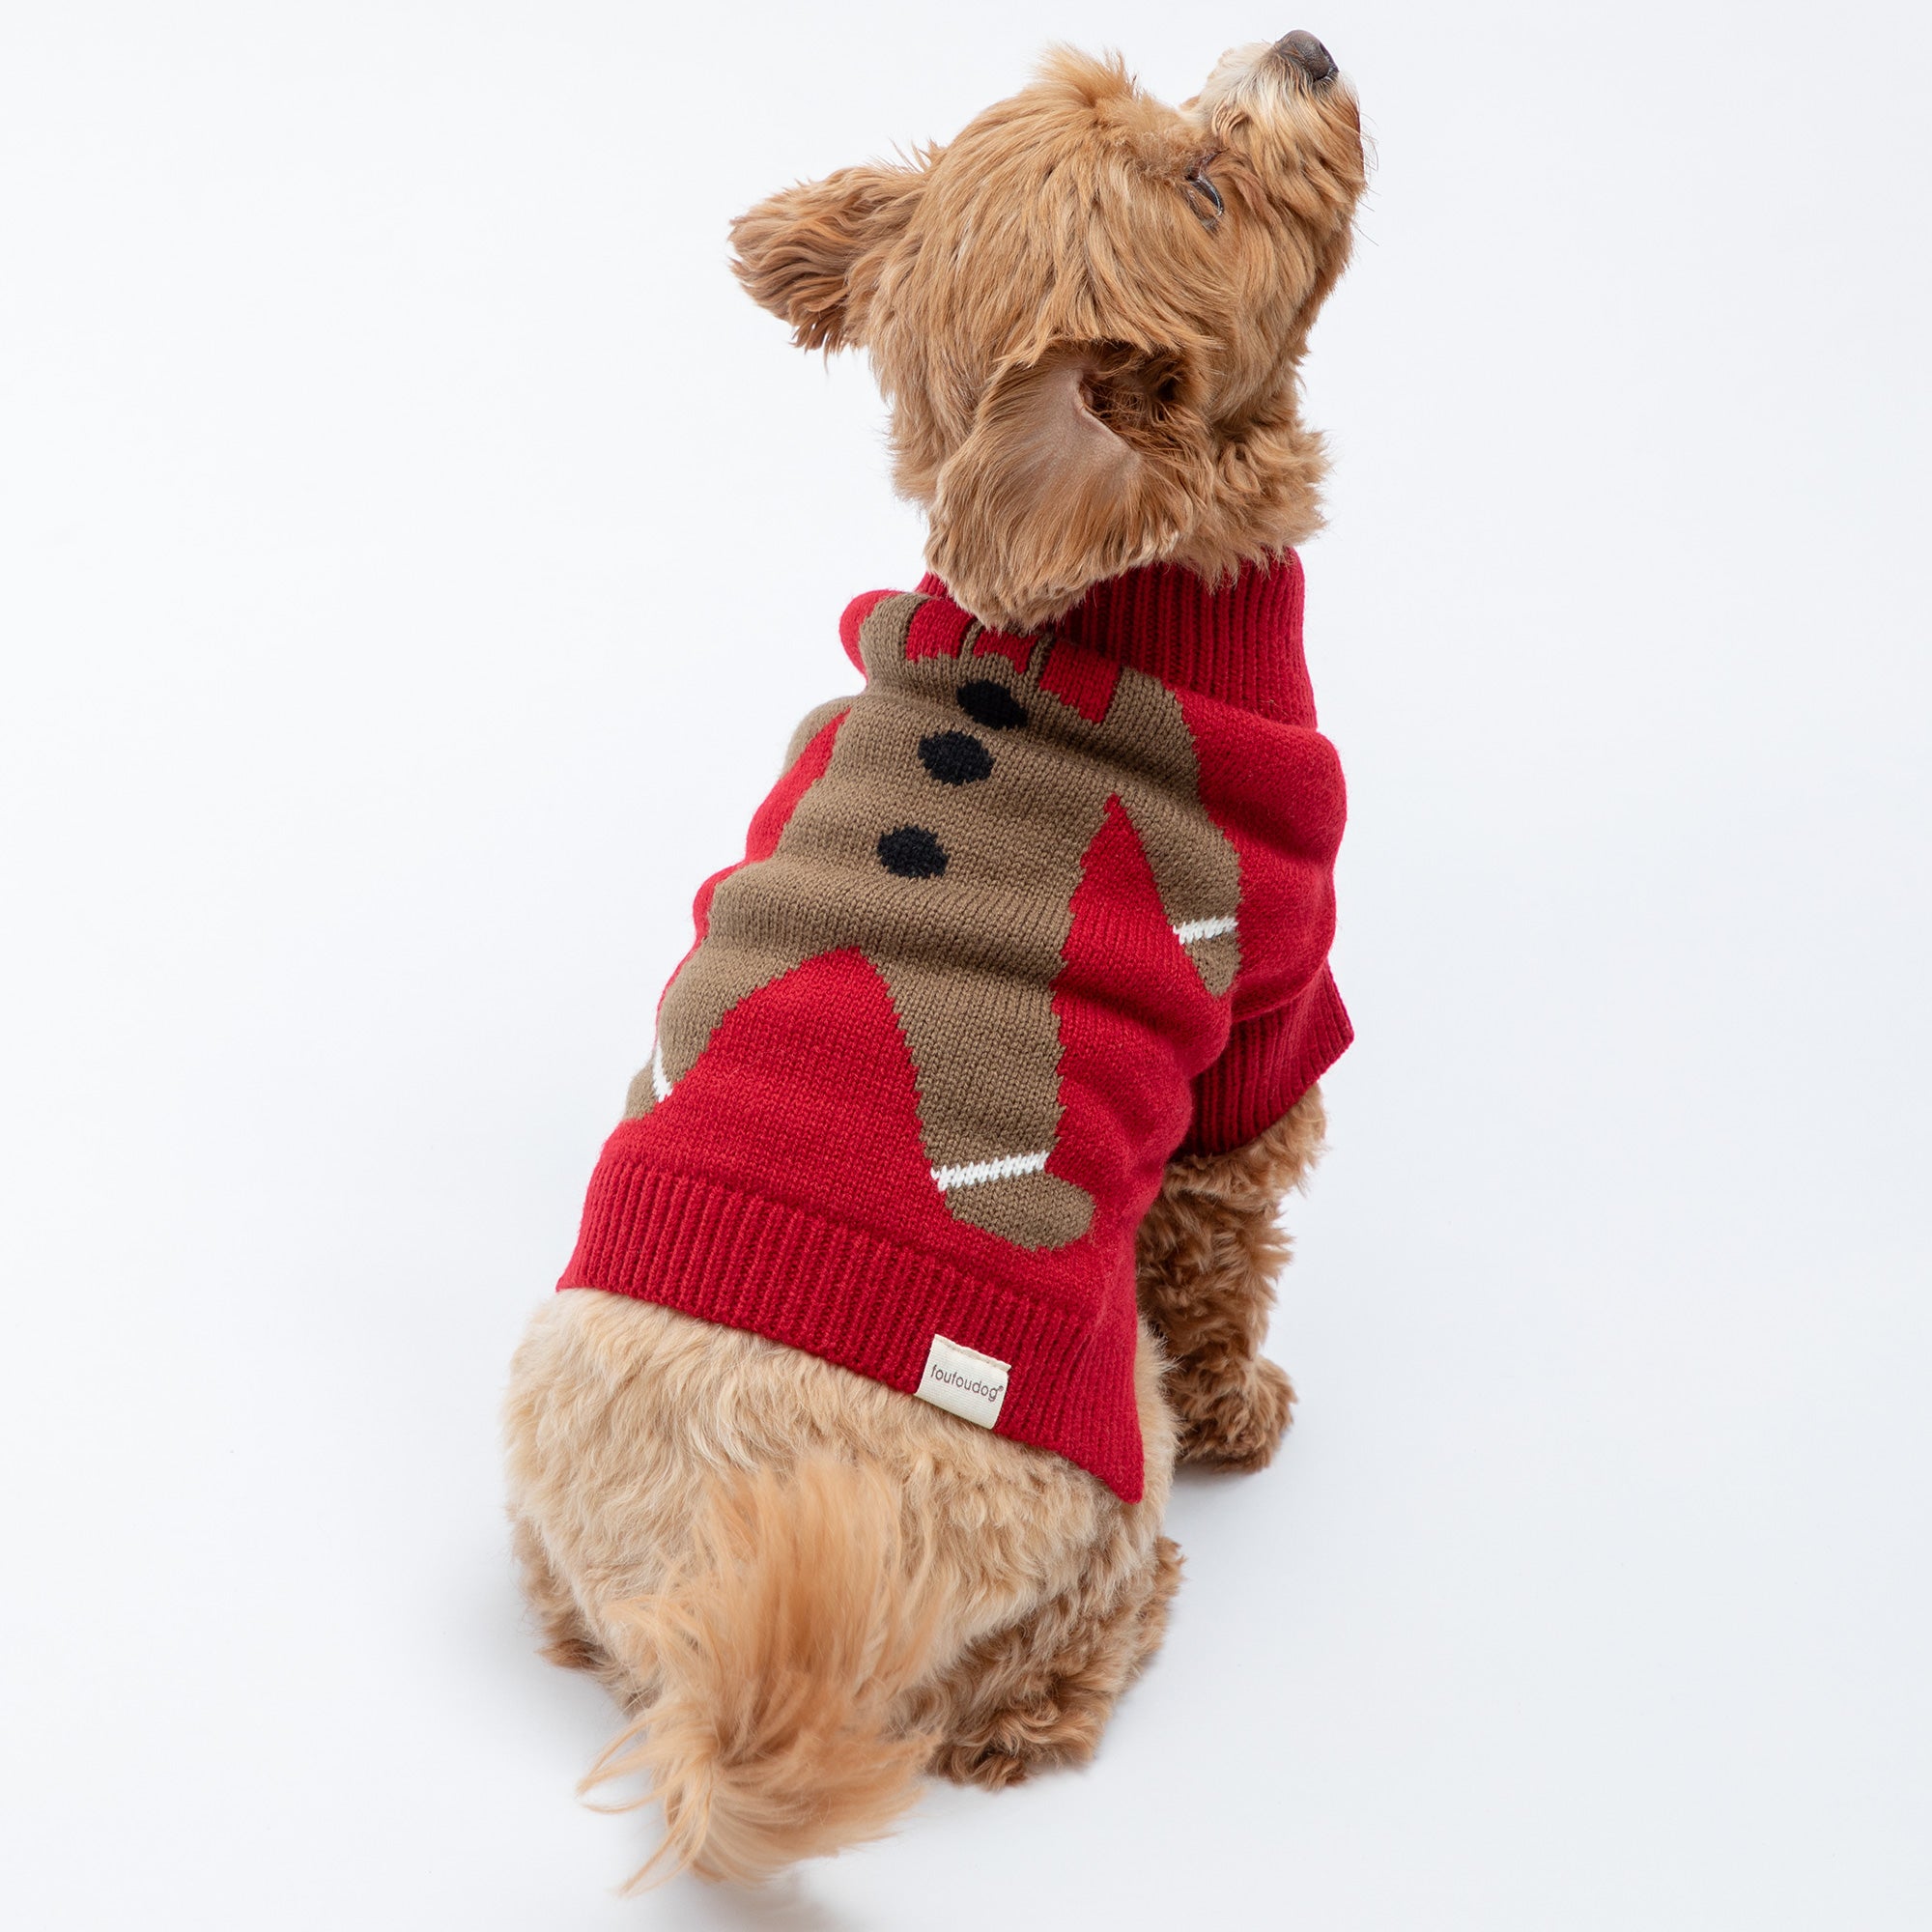 Cozy Christmas Pet Sweater - Gingerbread - S